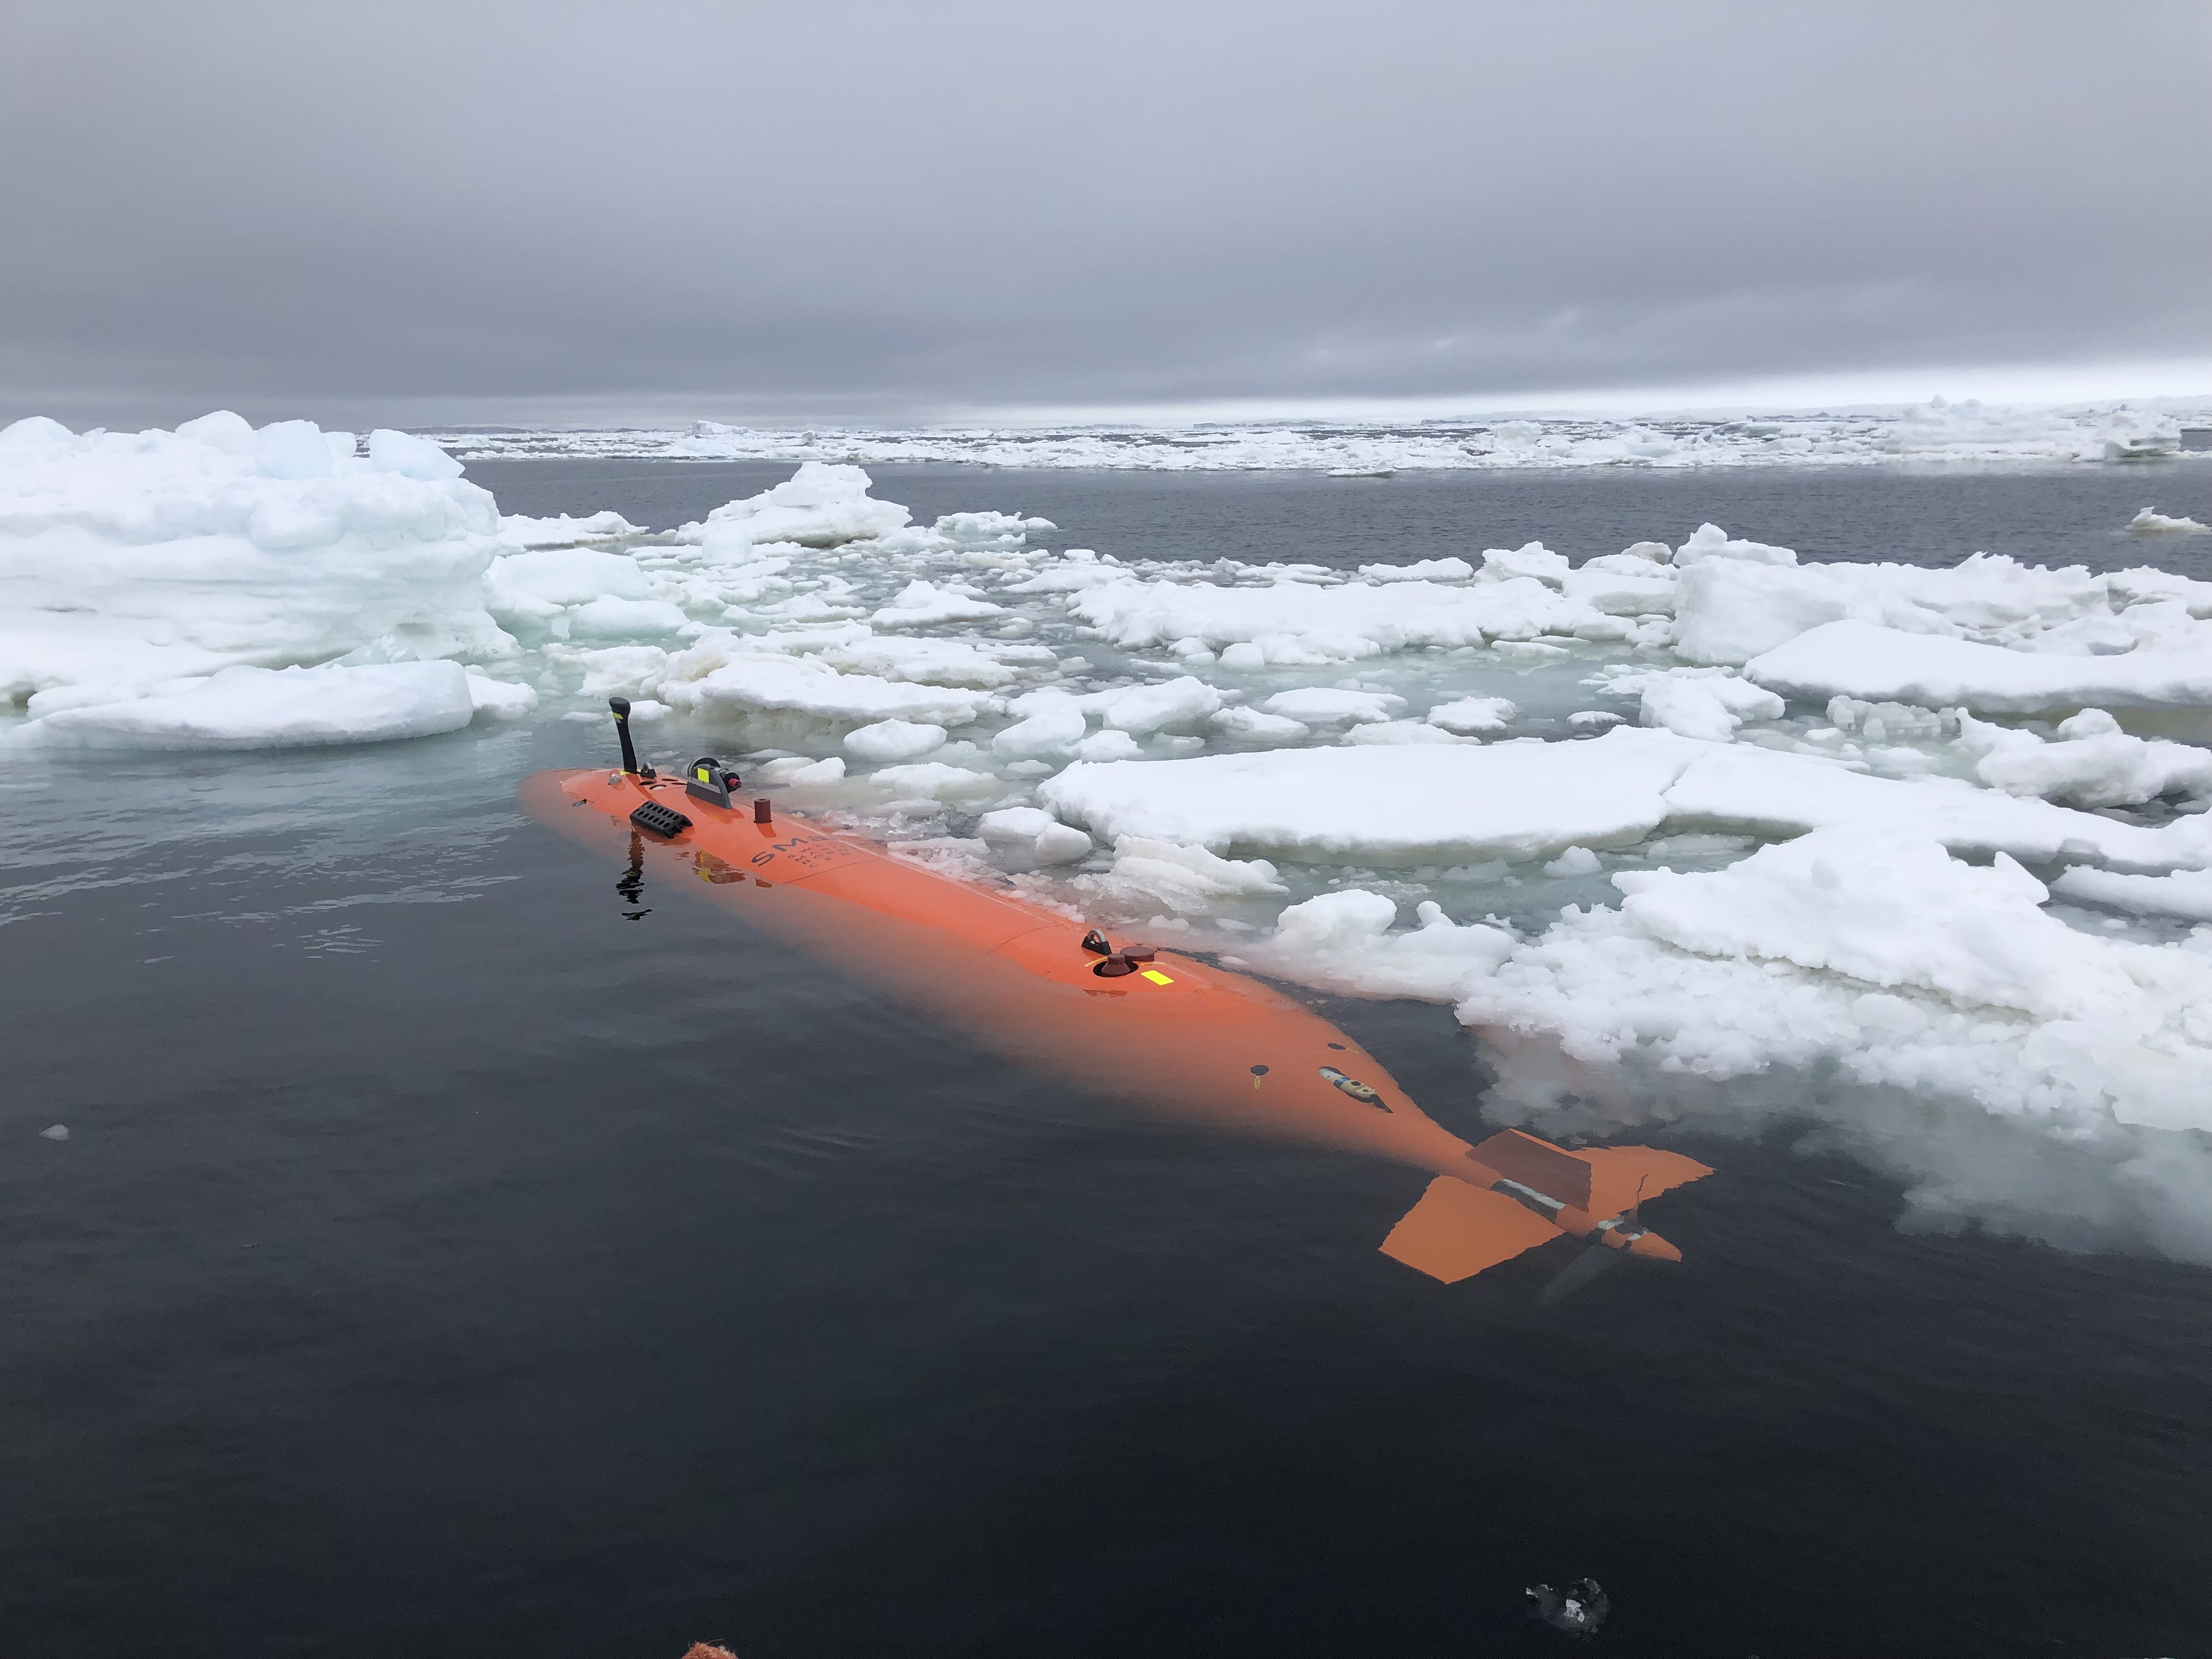 Rán, a Kongsberg HUGIN autonomous underwater vehicle, amongst sea ice in front of Thwaites Glacier, after a 20-hour mission mapping the seafloor. (Credit: Anna Wåhlin/University of Gothenburg).